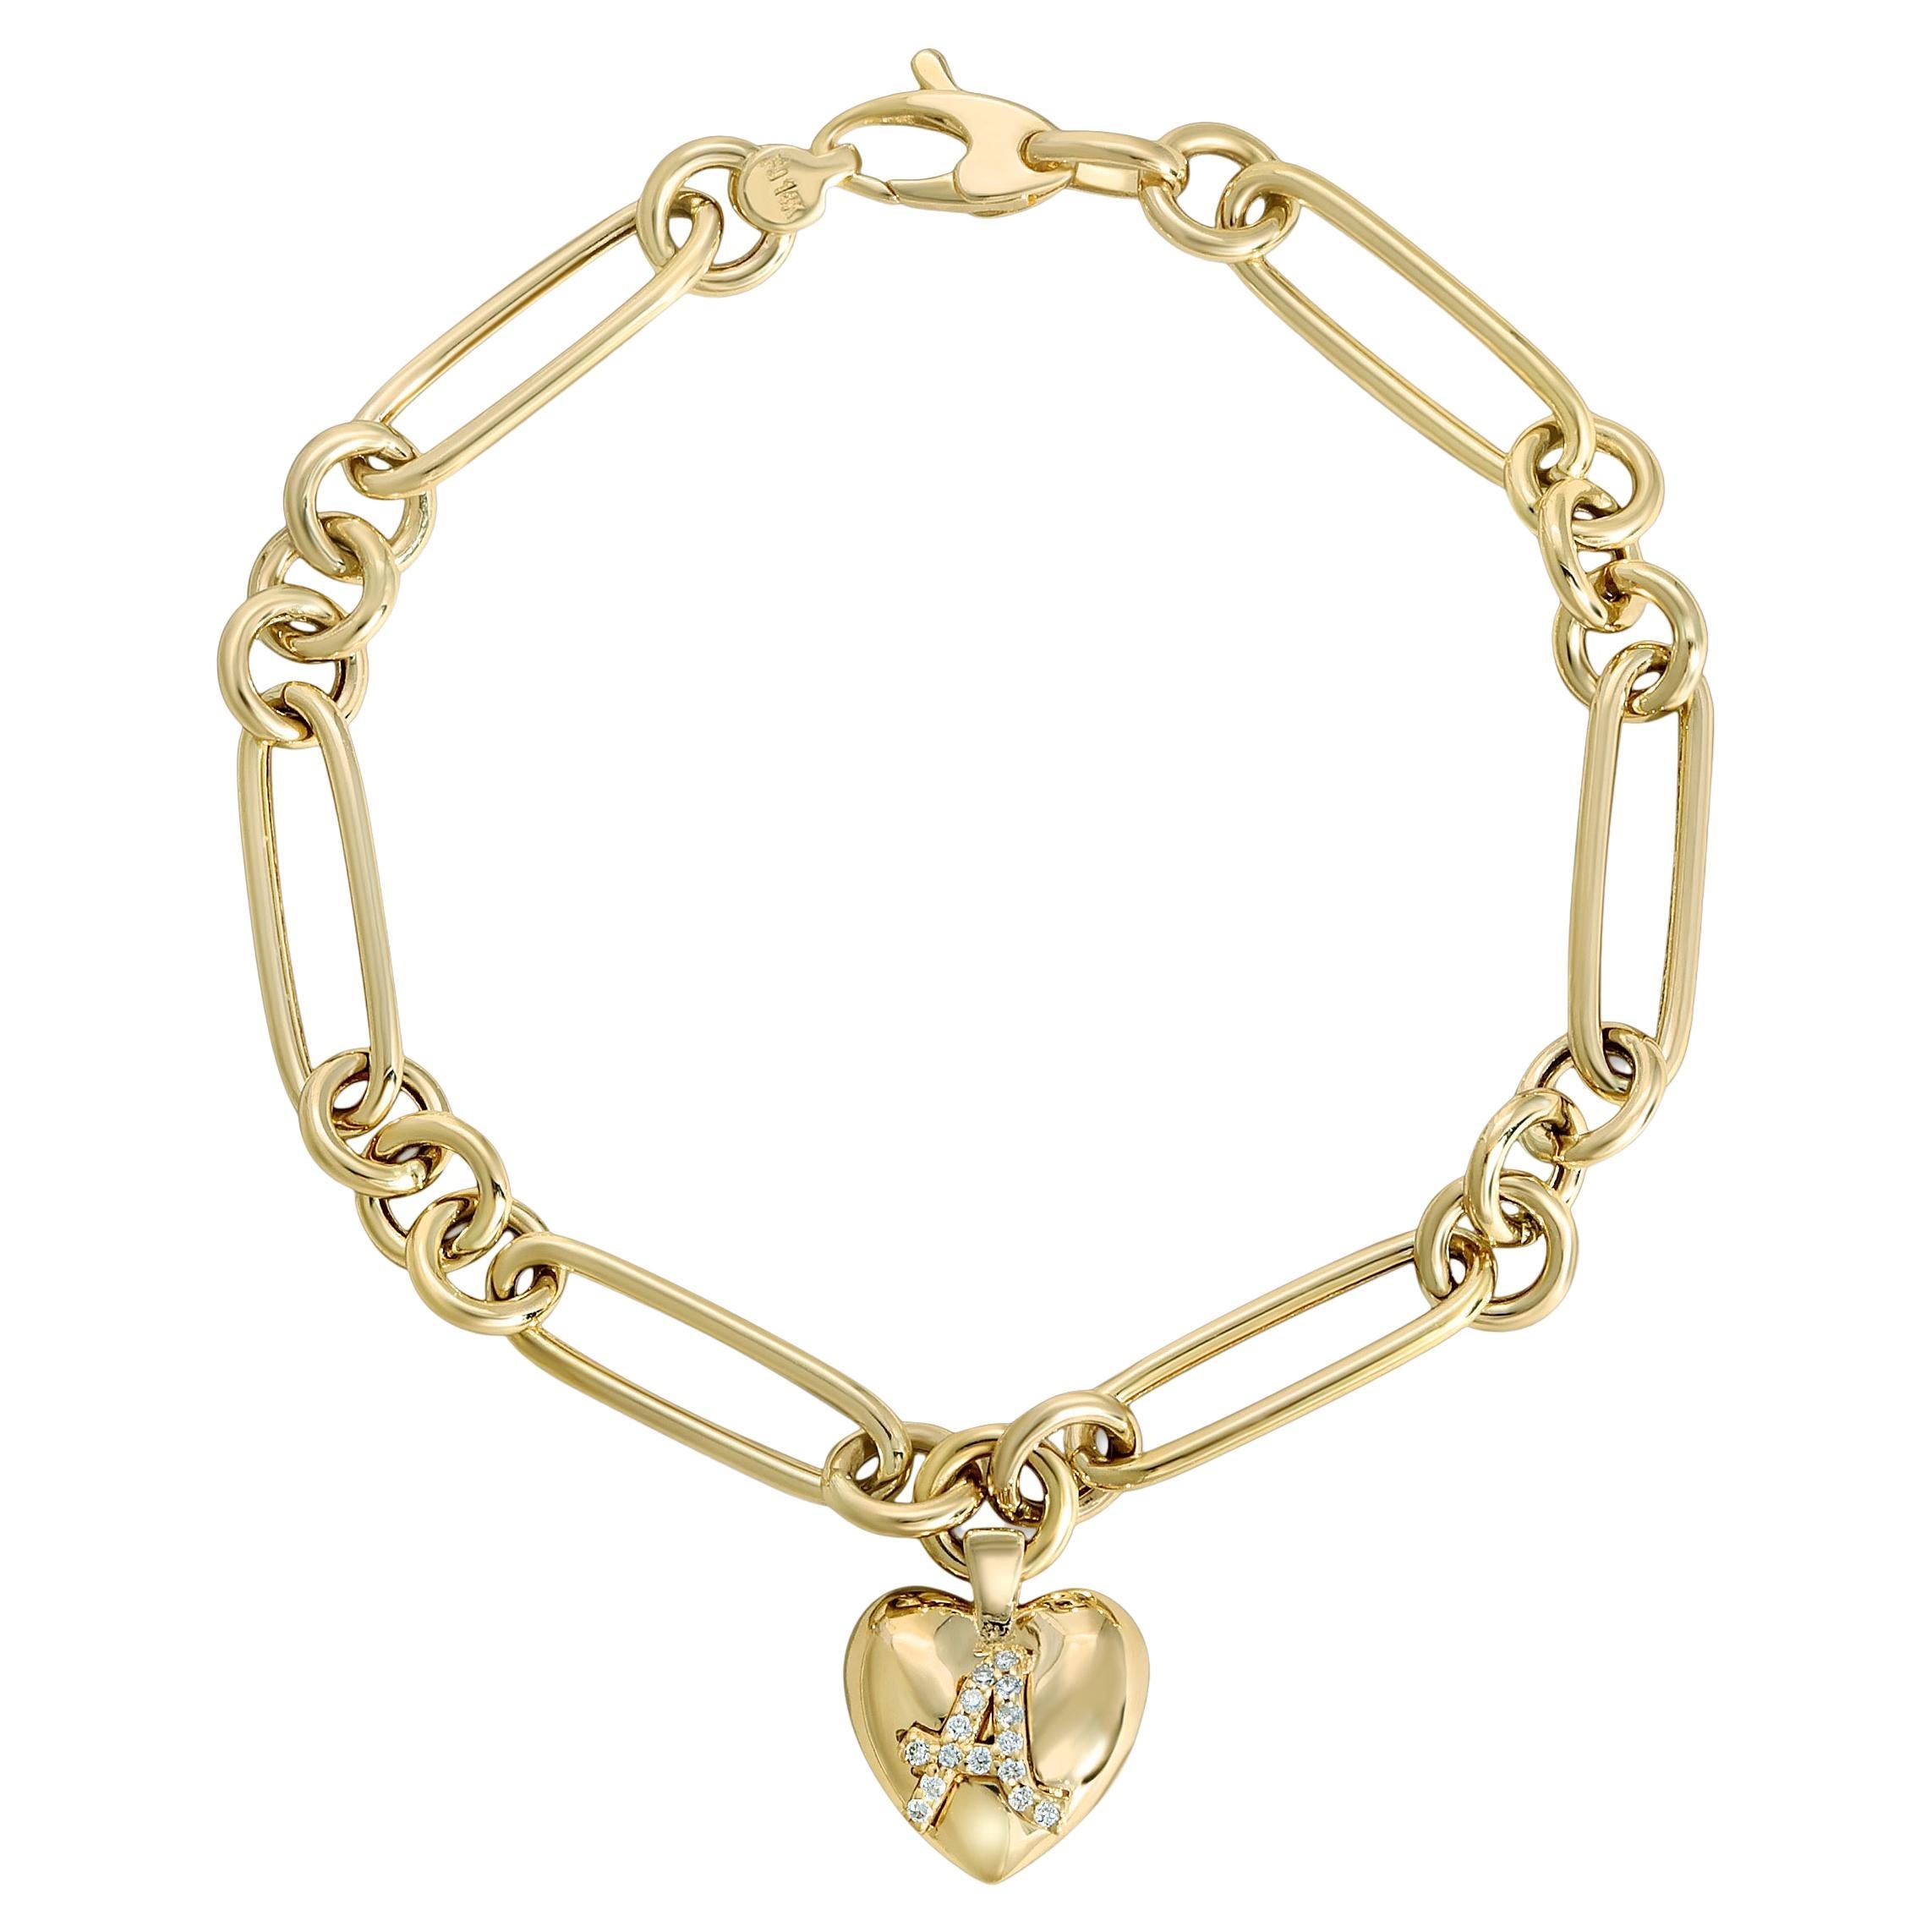 Jonne Amaya - 14K Solid Chain Personalized Pave Initial Heart Charm Bracelet American Contemporary Gold